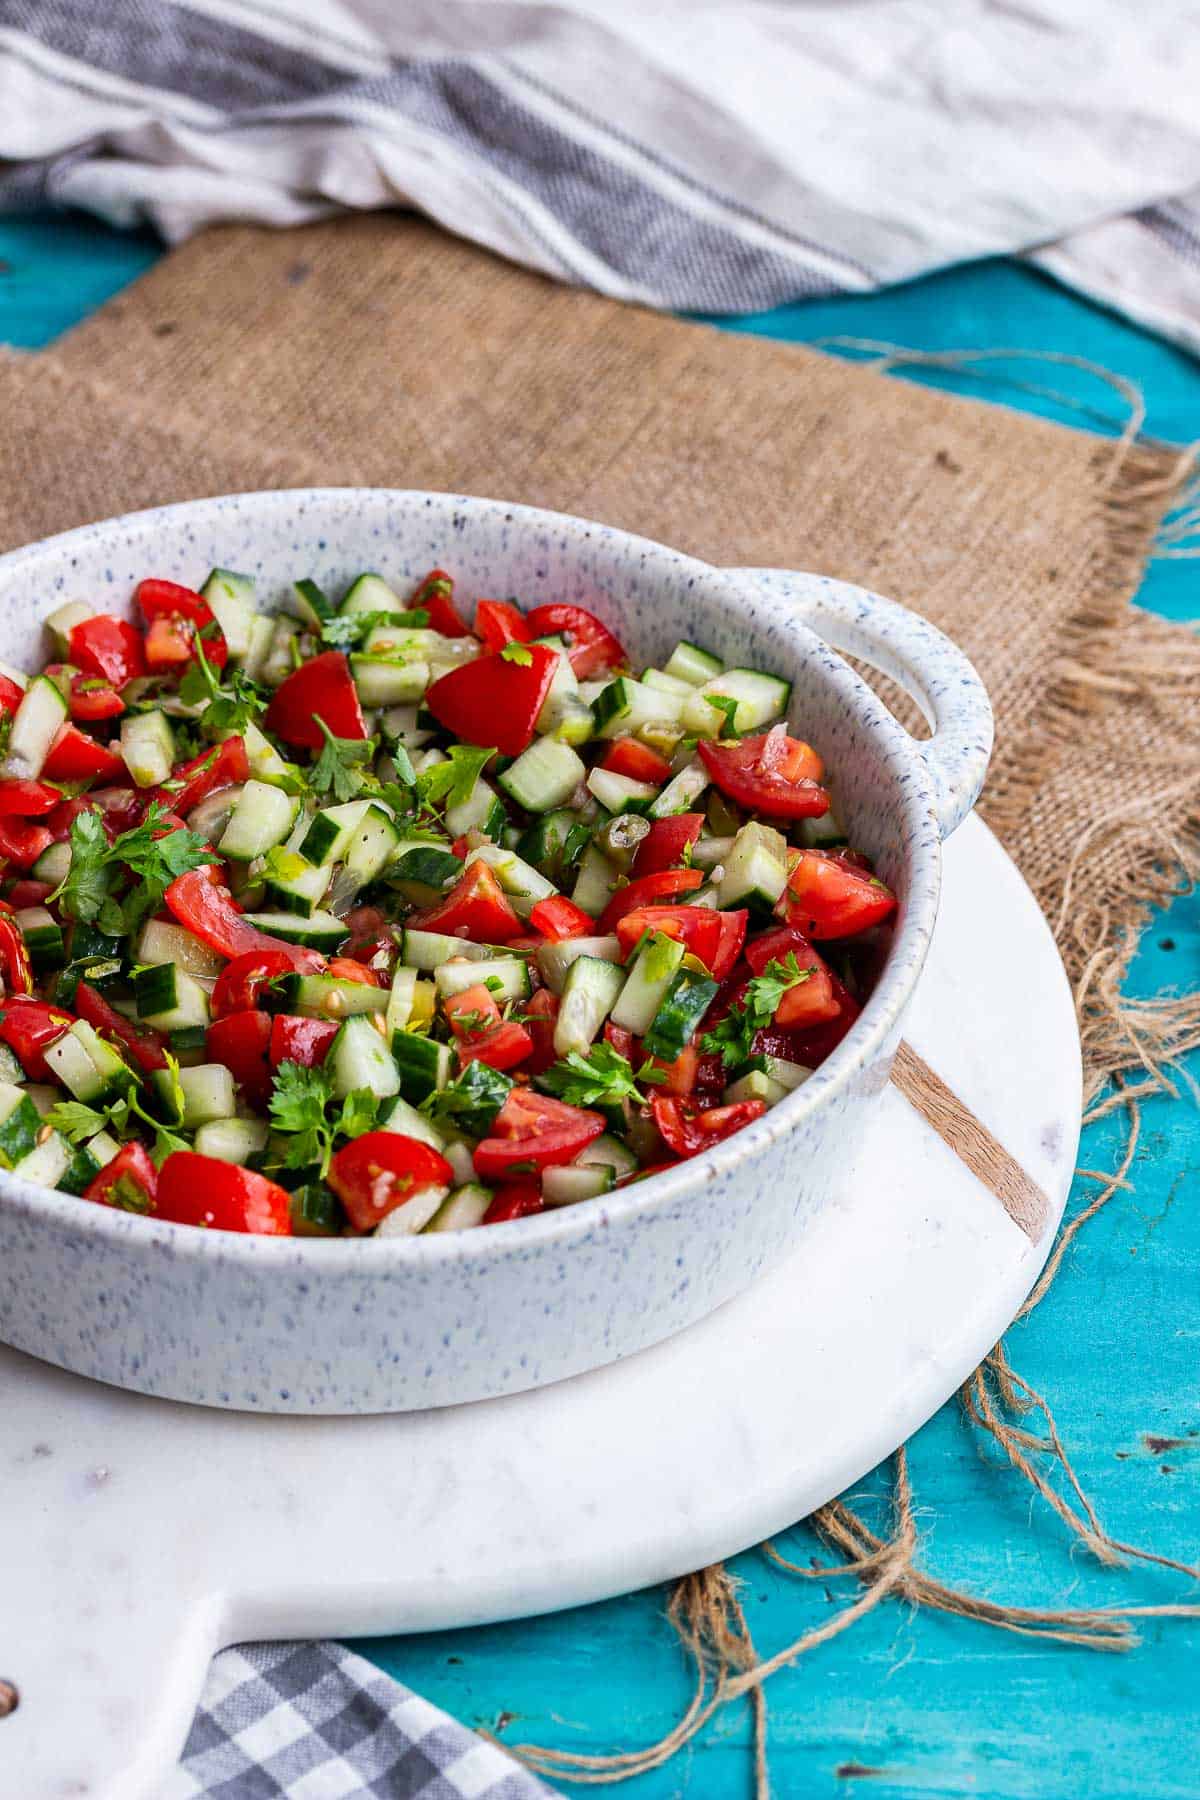 Dish of cucumber and tomato on a blue background